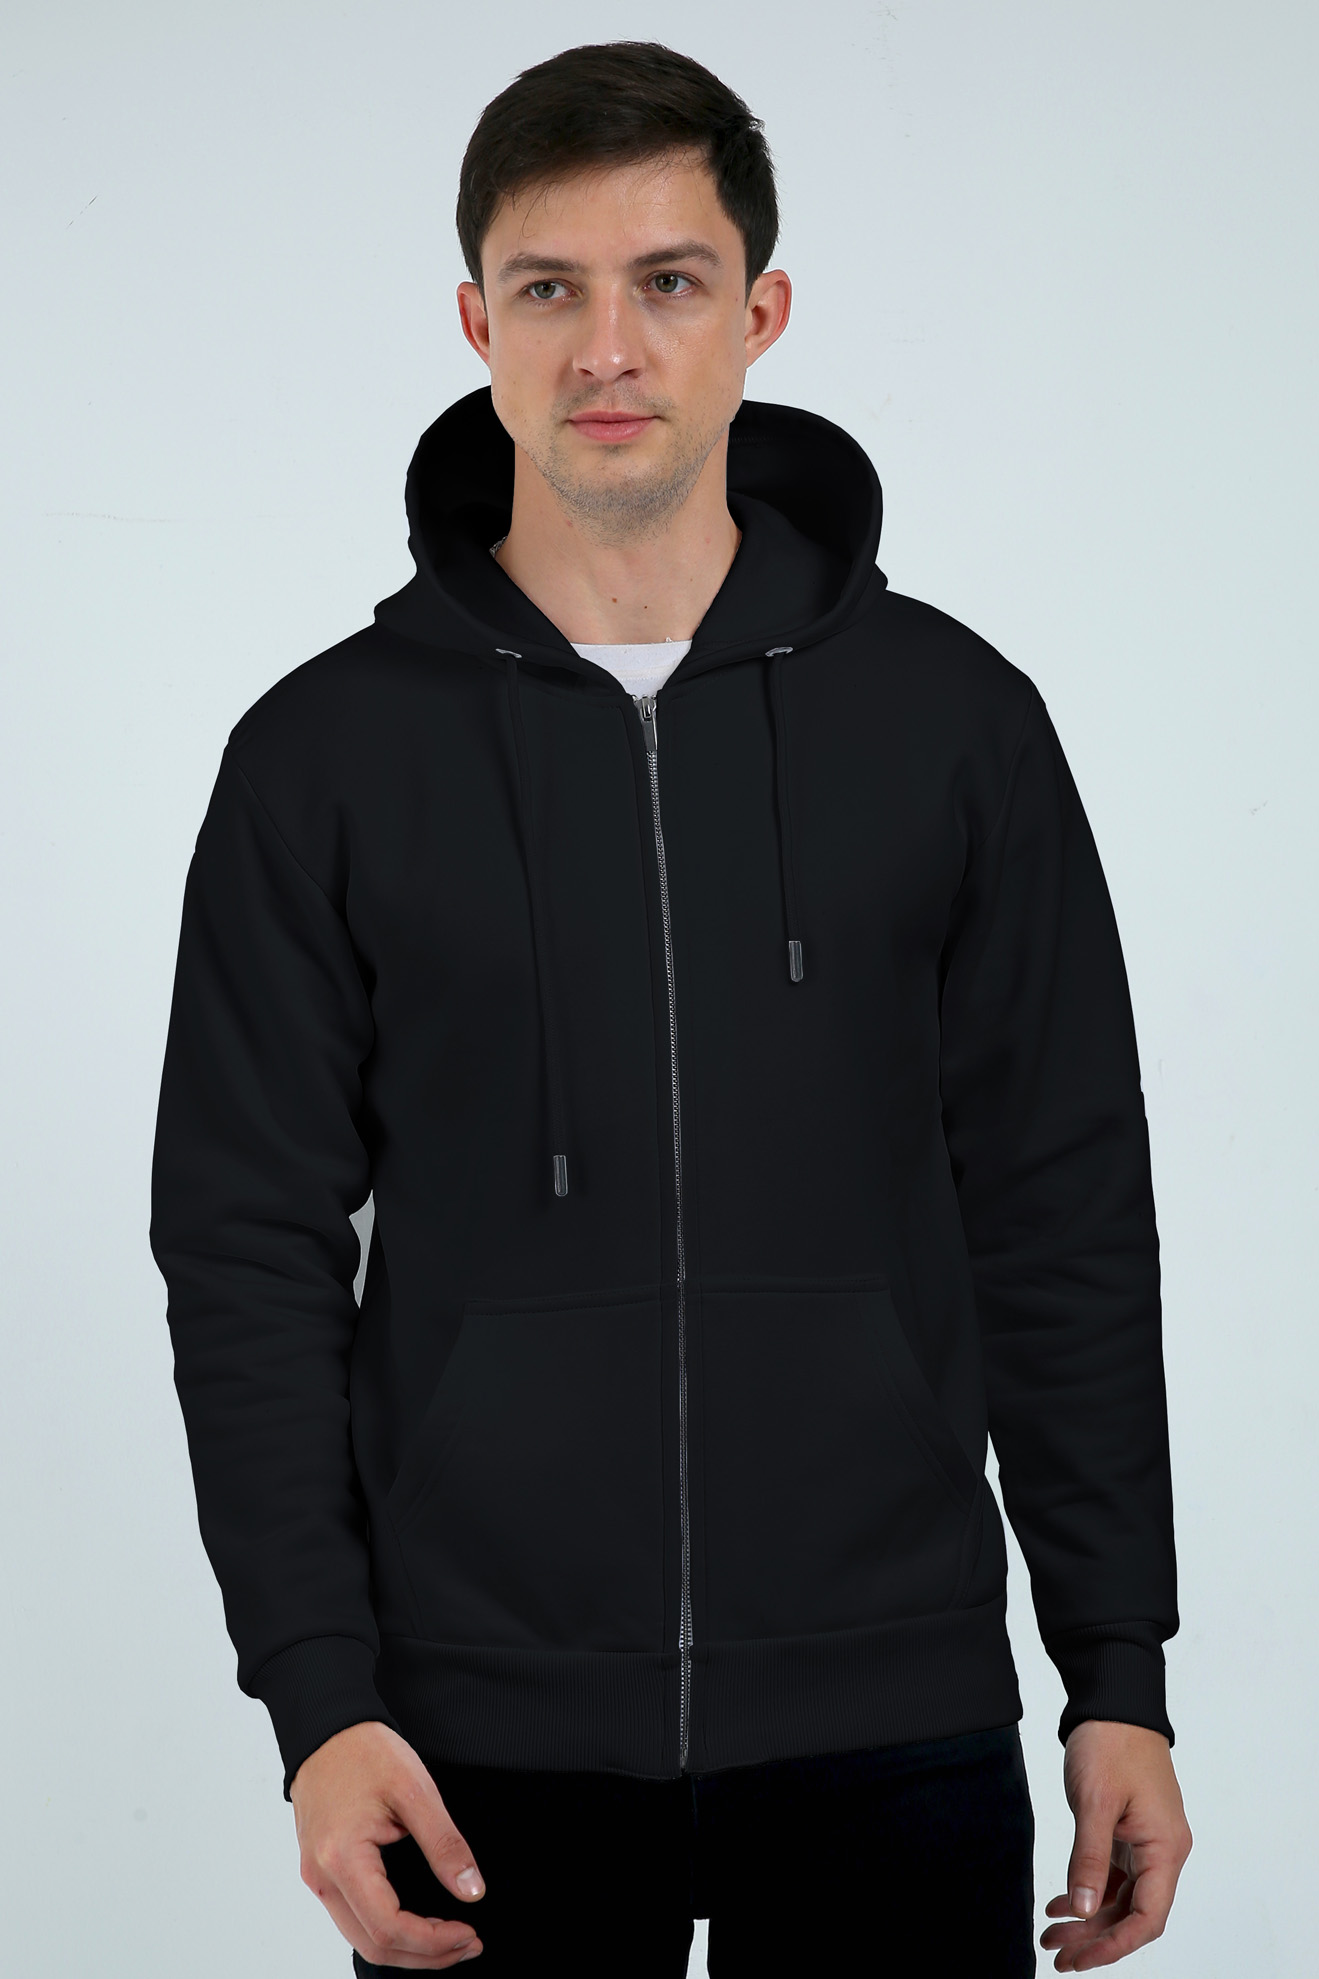 LET'S PLAY THE GAME Heavyweight Zip Hoodie for Men